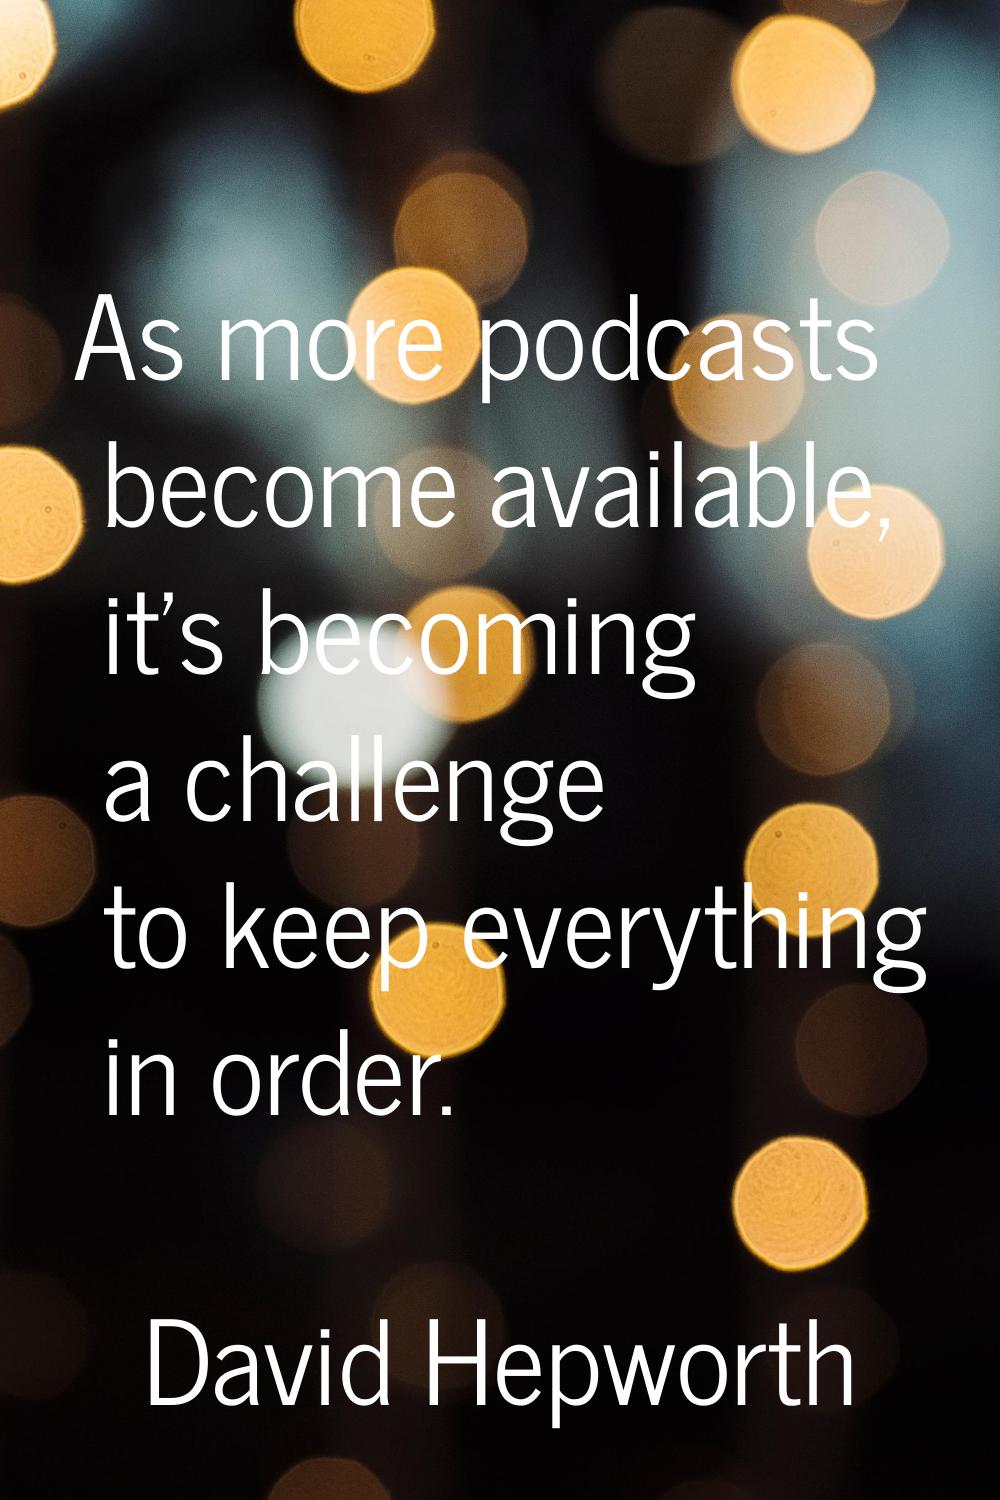 As more podcasts become available, it's becoming a challenge to keep everything in order.